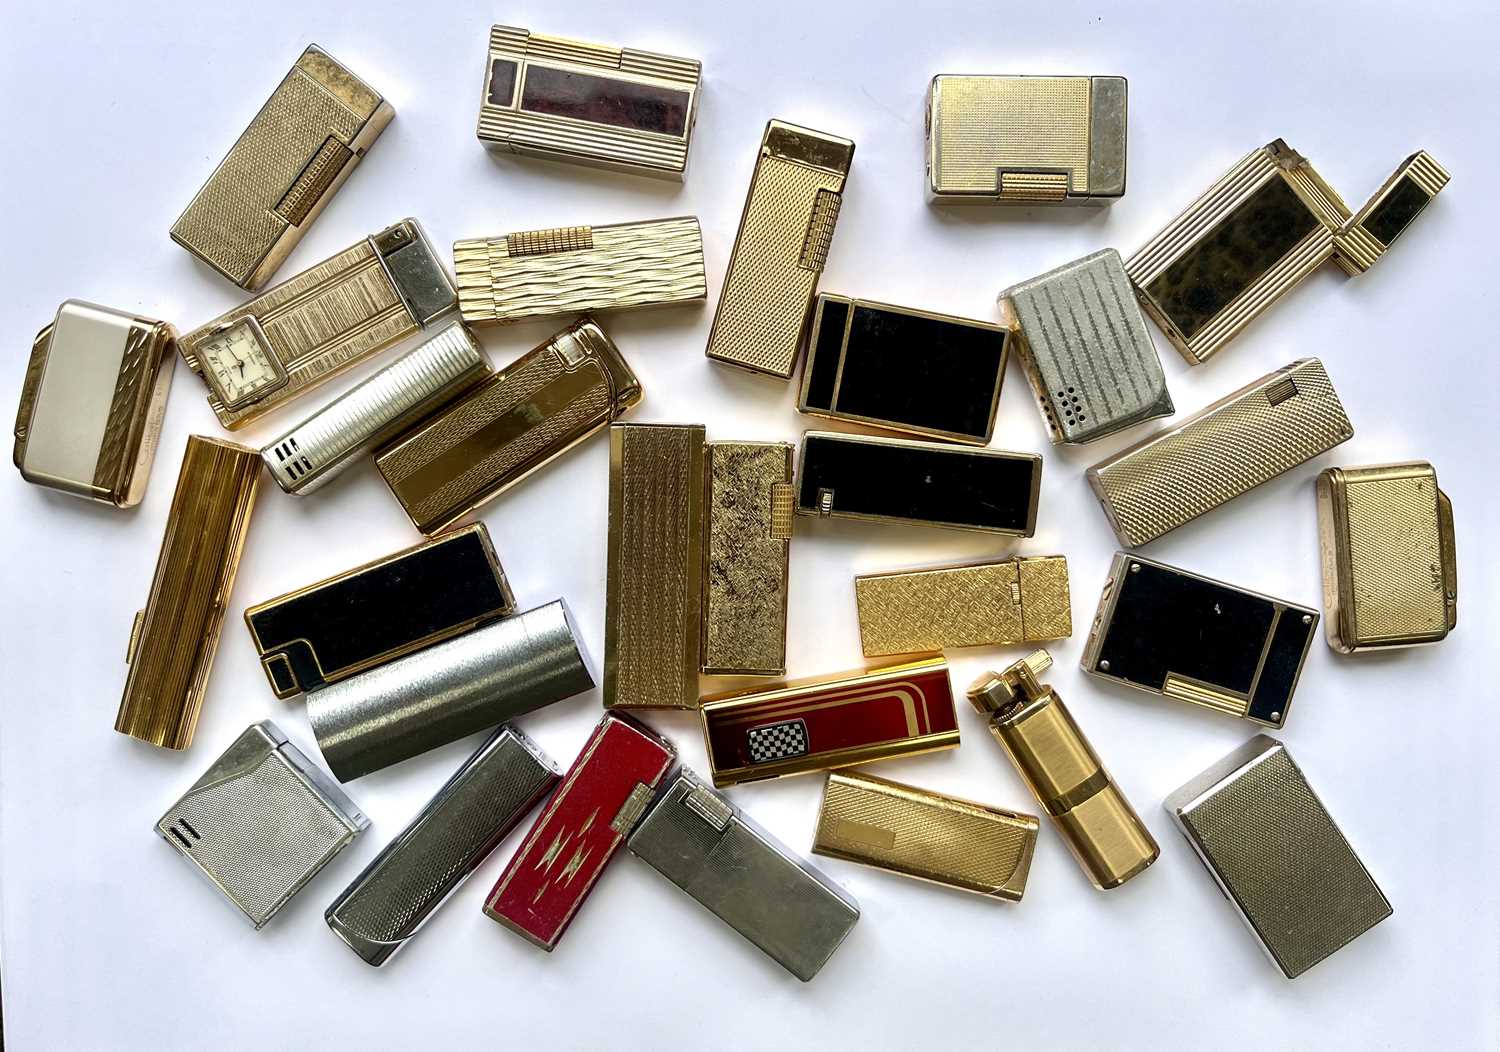 A collection of gas lighters